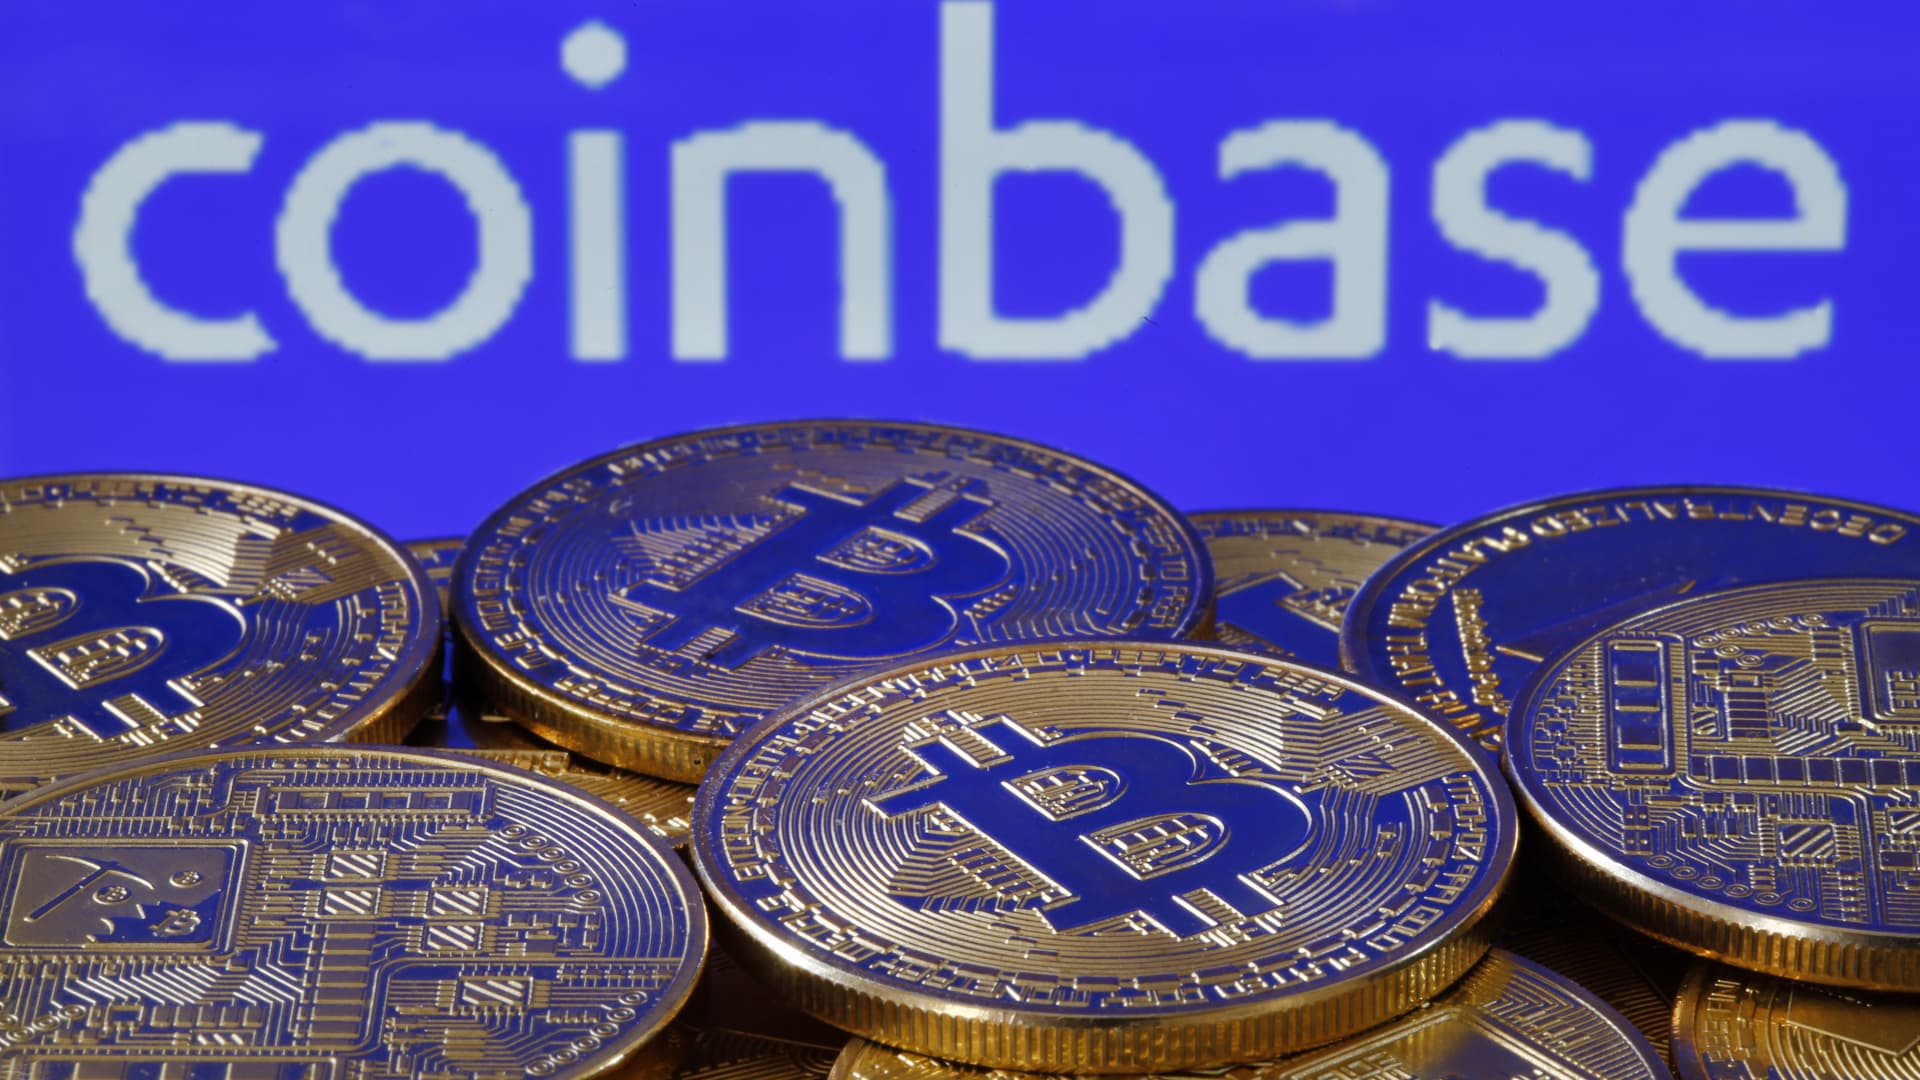 Coinbase says it has no exposure to collapsed crypto firms Celsius, 3AC and Voyager